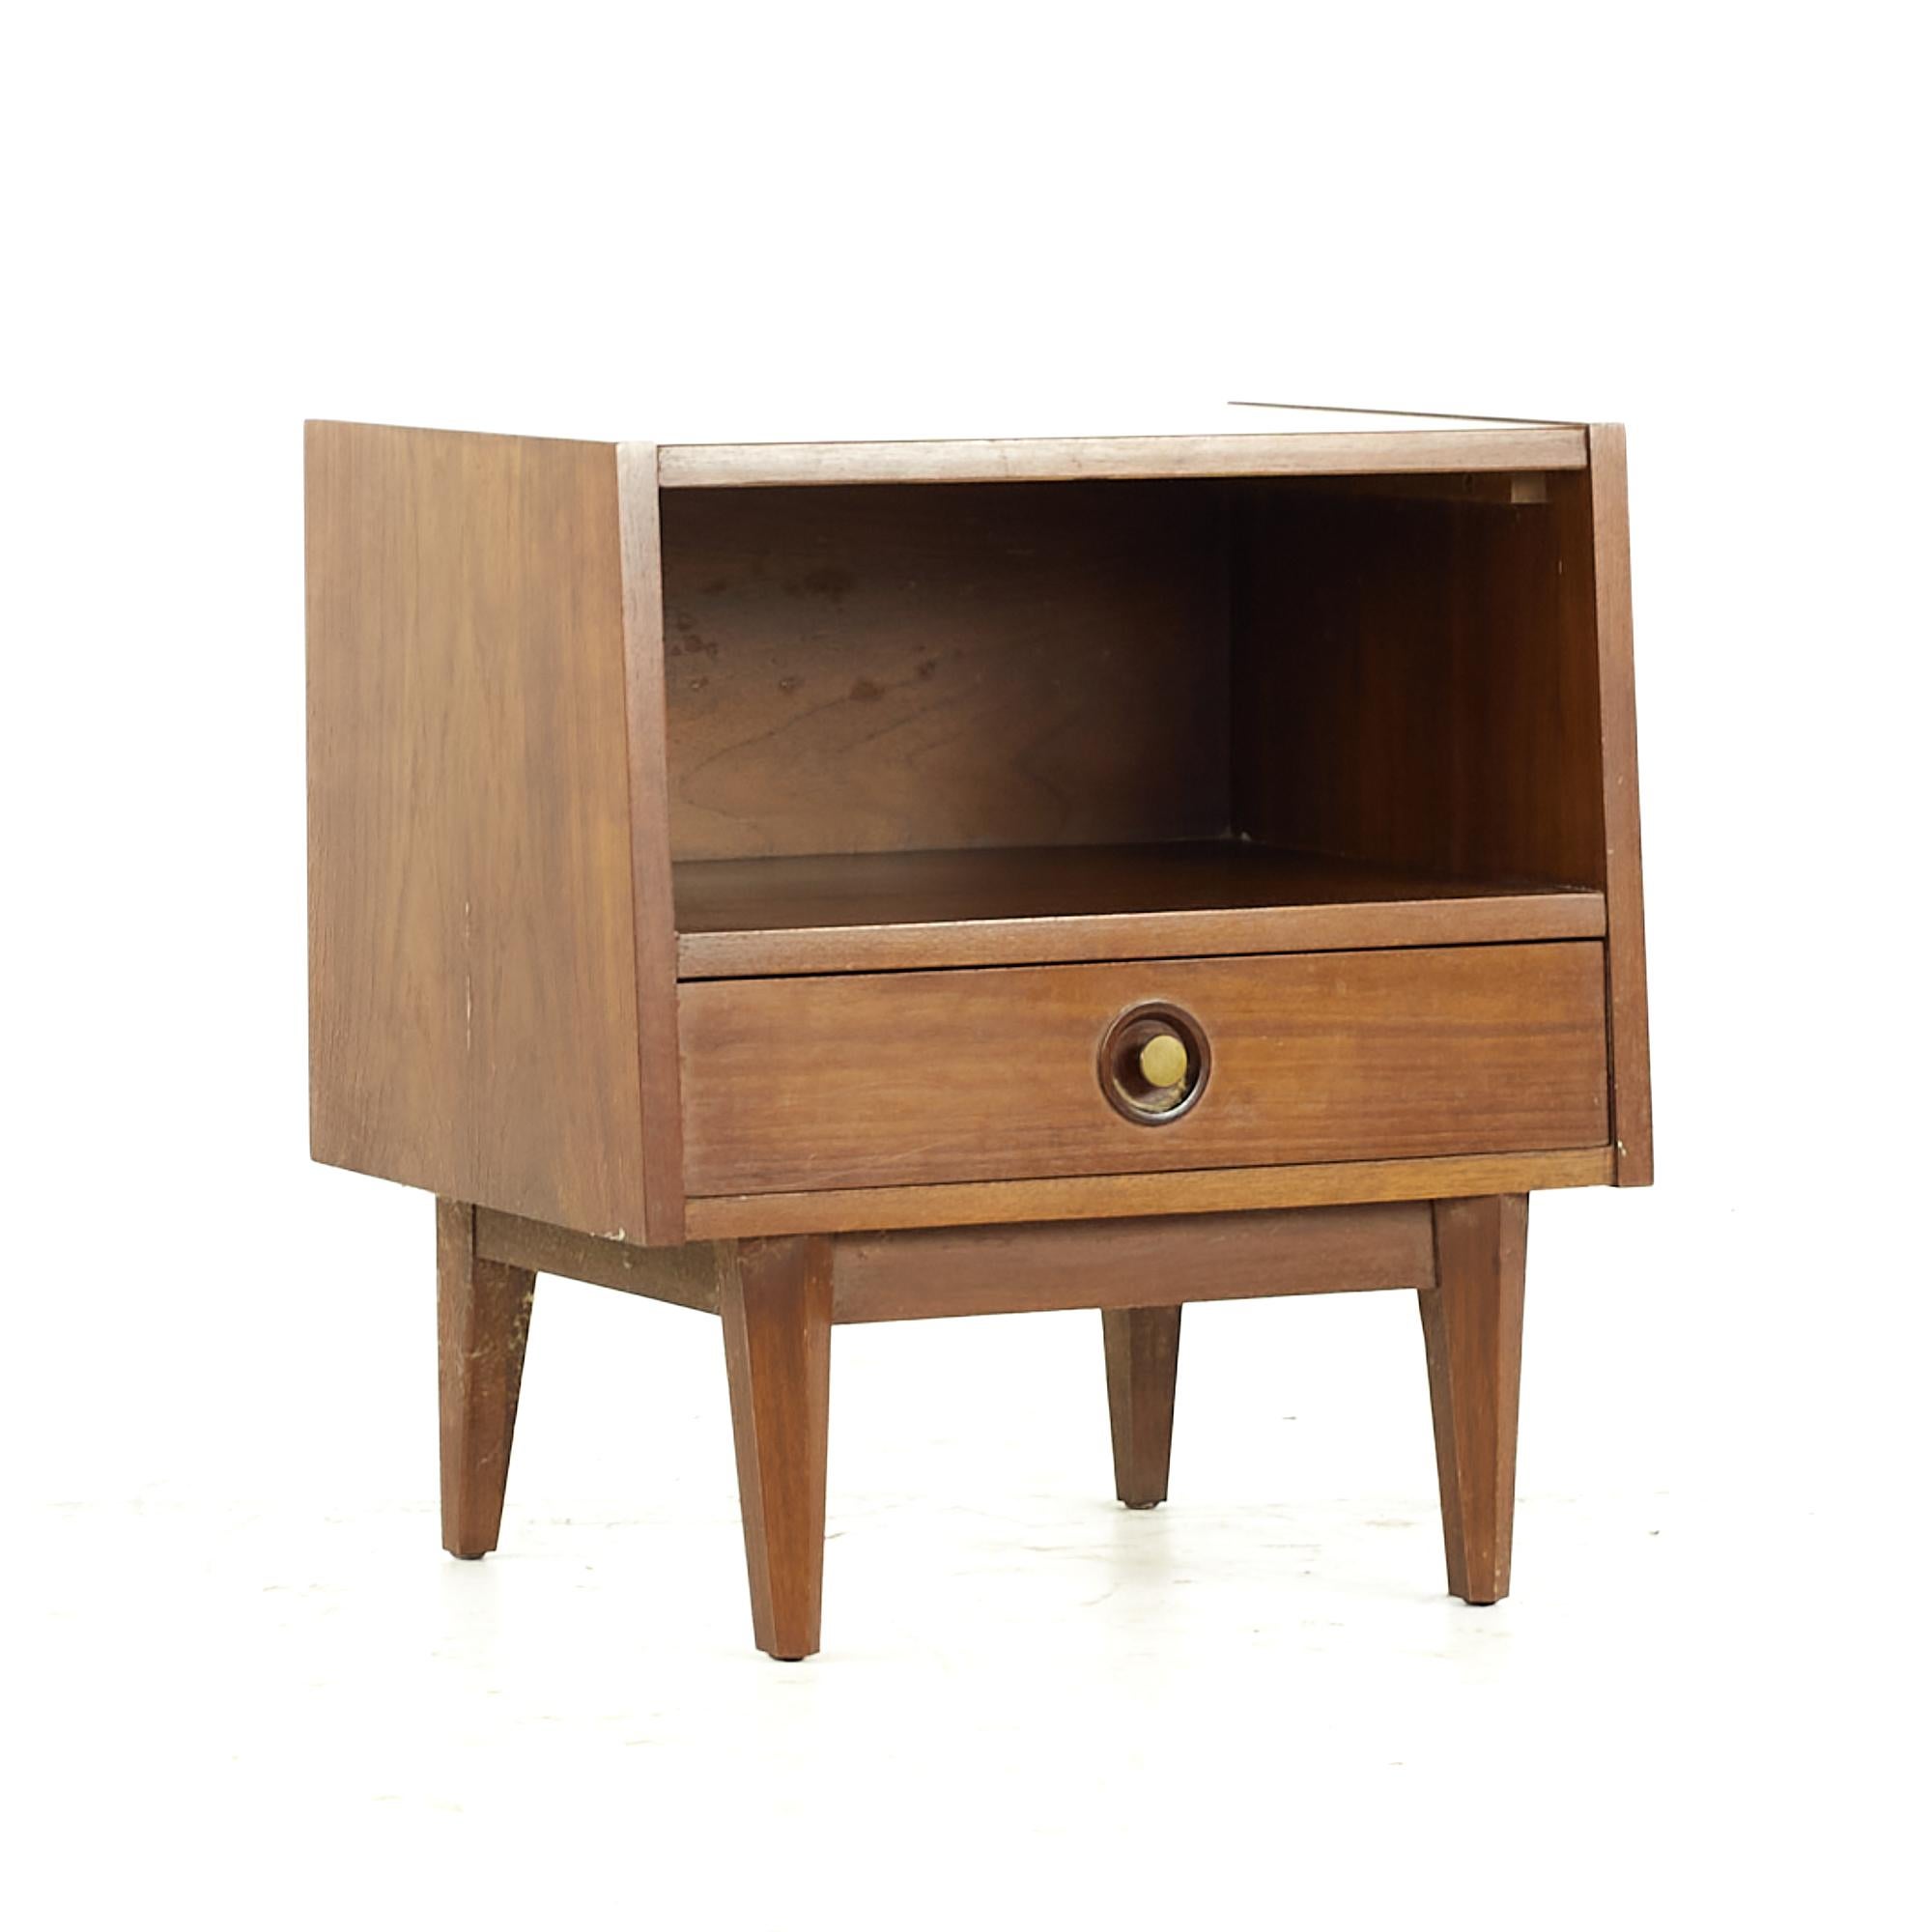 Albert Parvin American of Martinsville MCM Walnut and Brass Nightstands, Pair In Good Condition For Sale In Countryside, IL